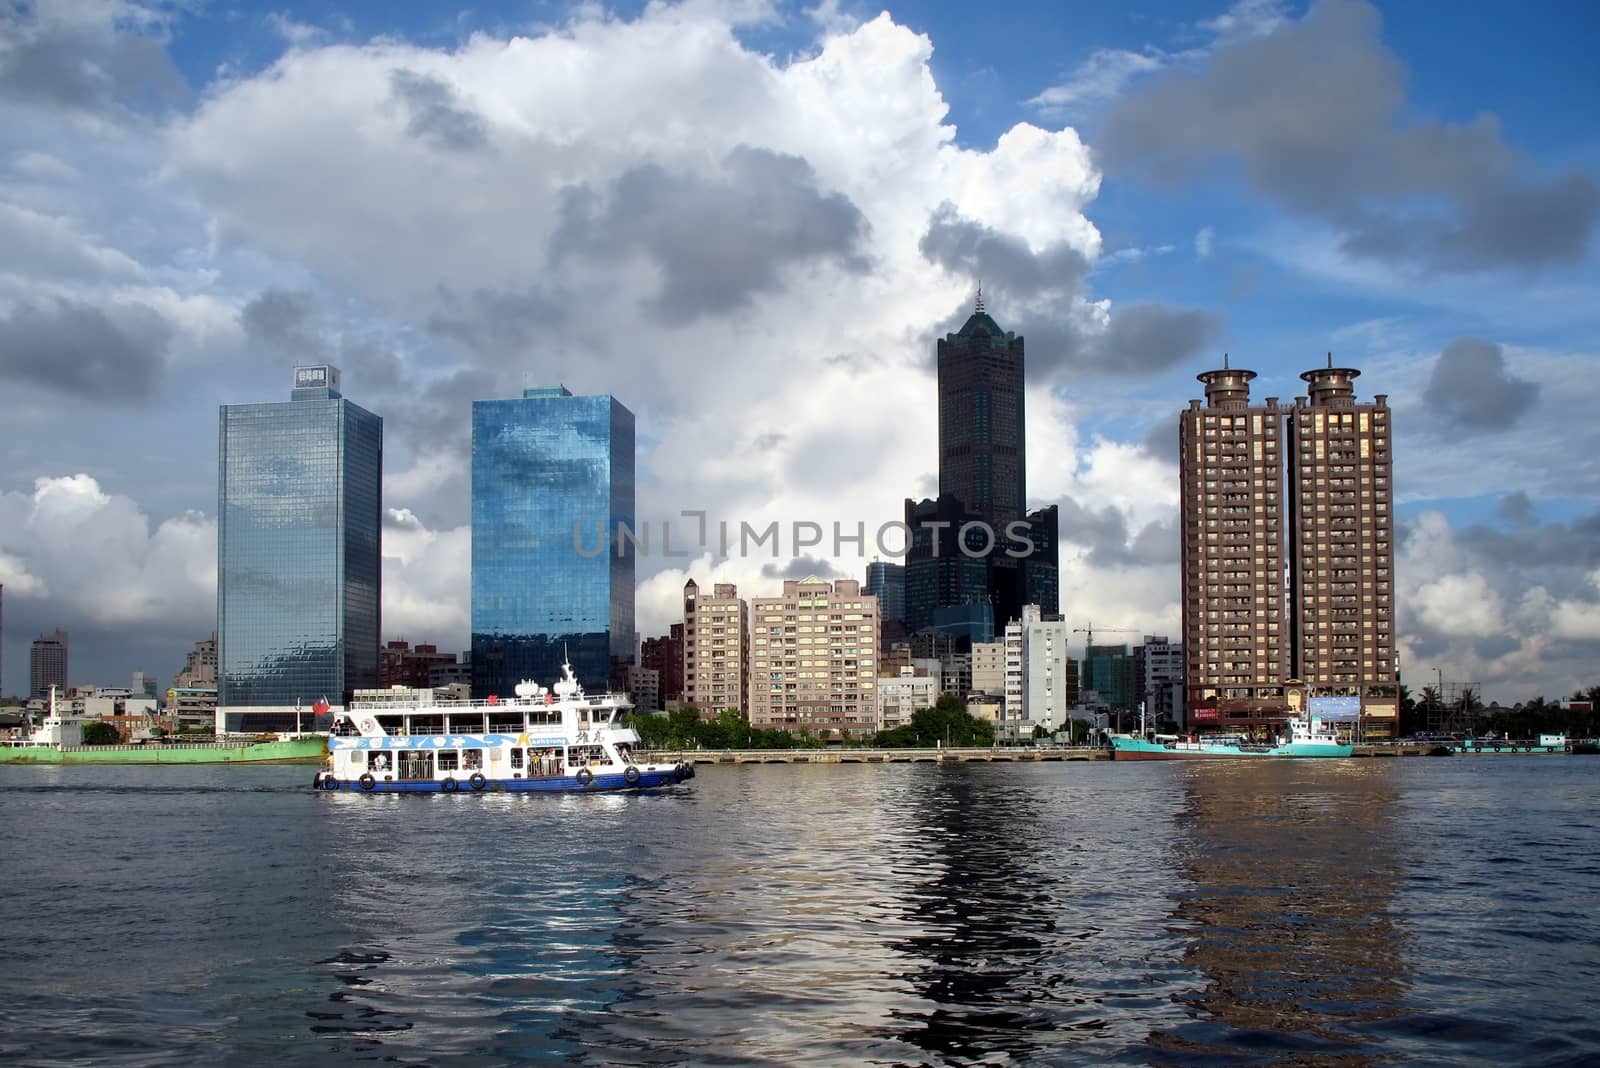 The waterfront of Kaohsiung City in Taiwan, in the back is the Tuntex Tower
